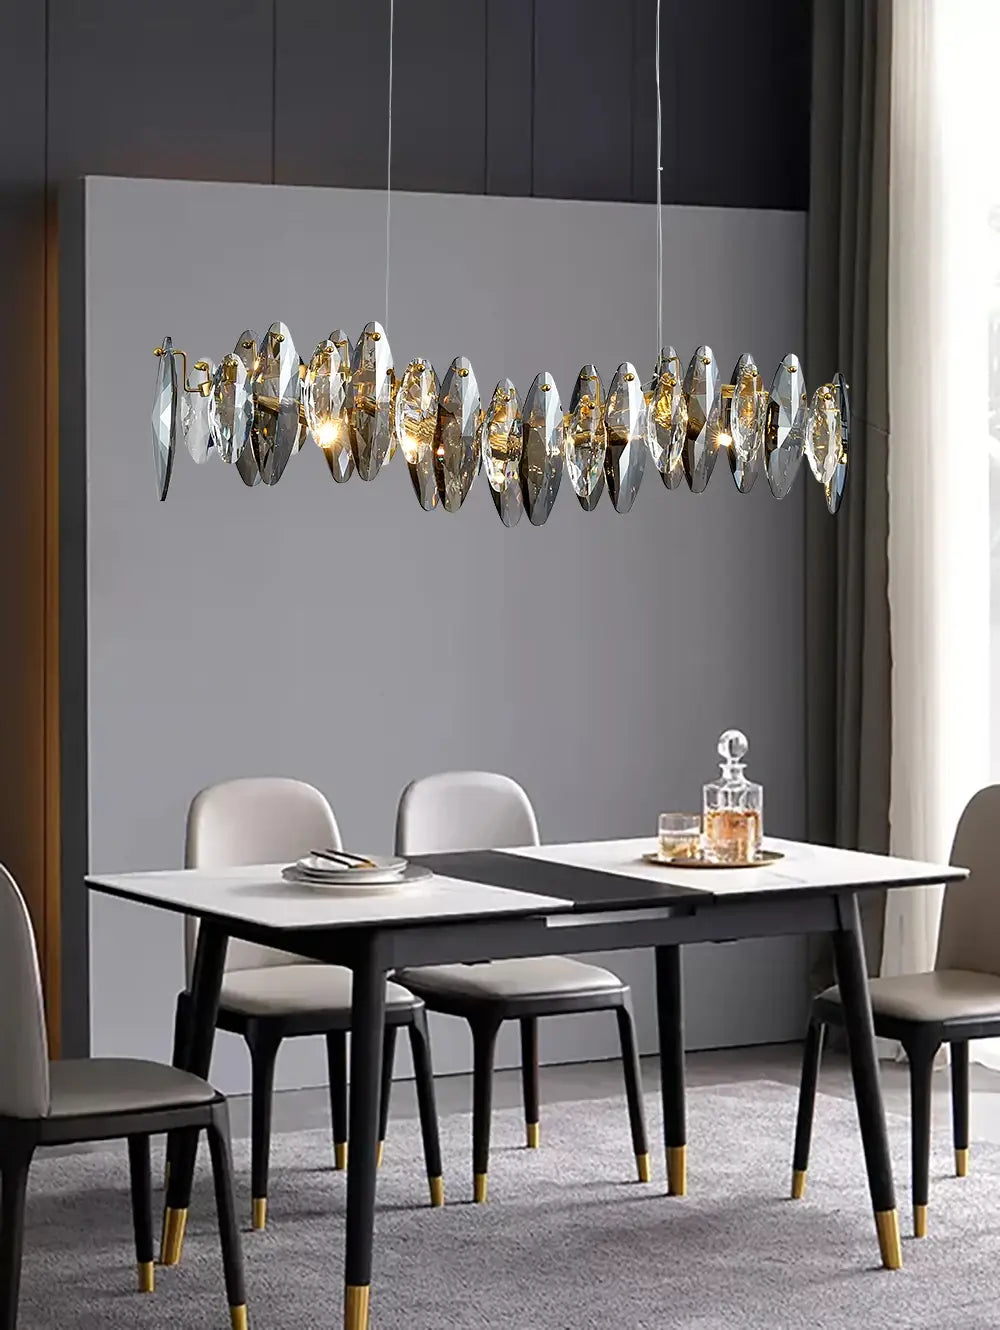 Luxury Large Hanging Wave Crystal Chandelier for Dining, Kitchen